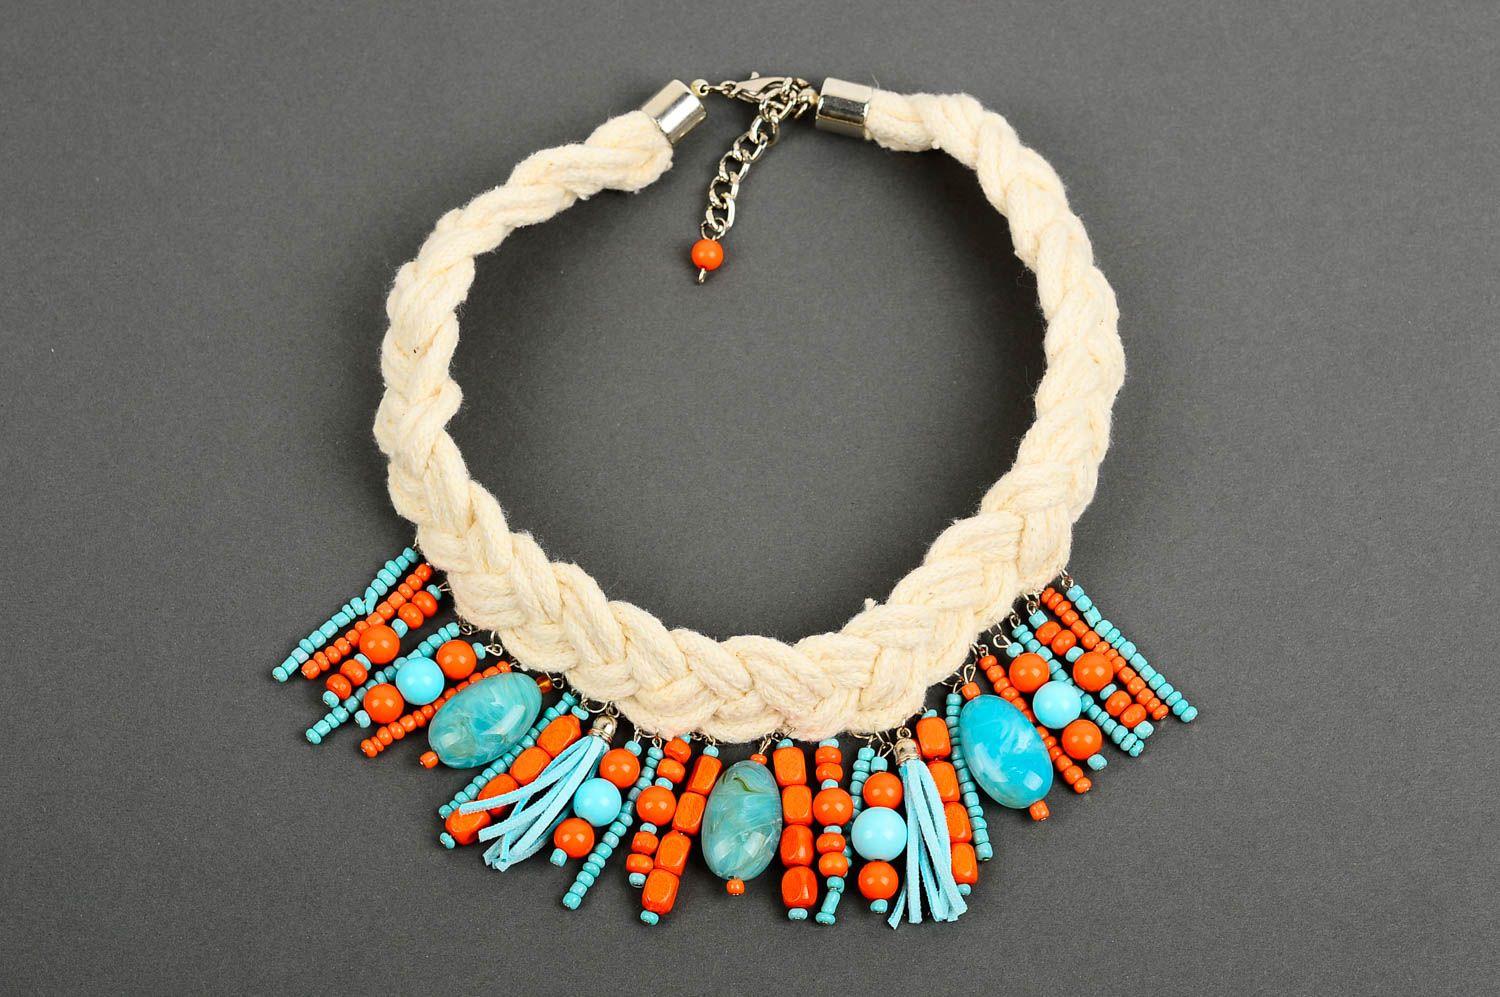 Unusual handmade textile necklace cool jewelry beaded necklace gifts for her photo 2